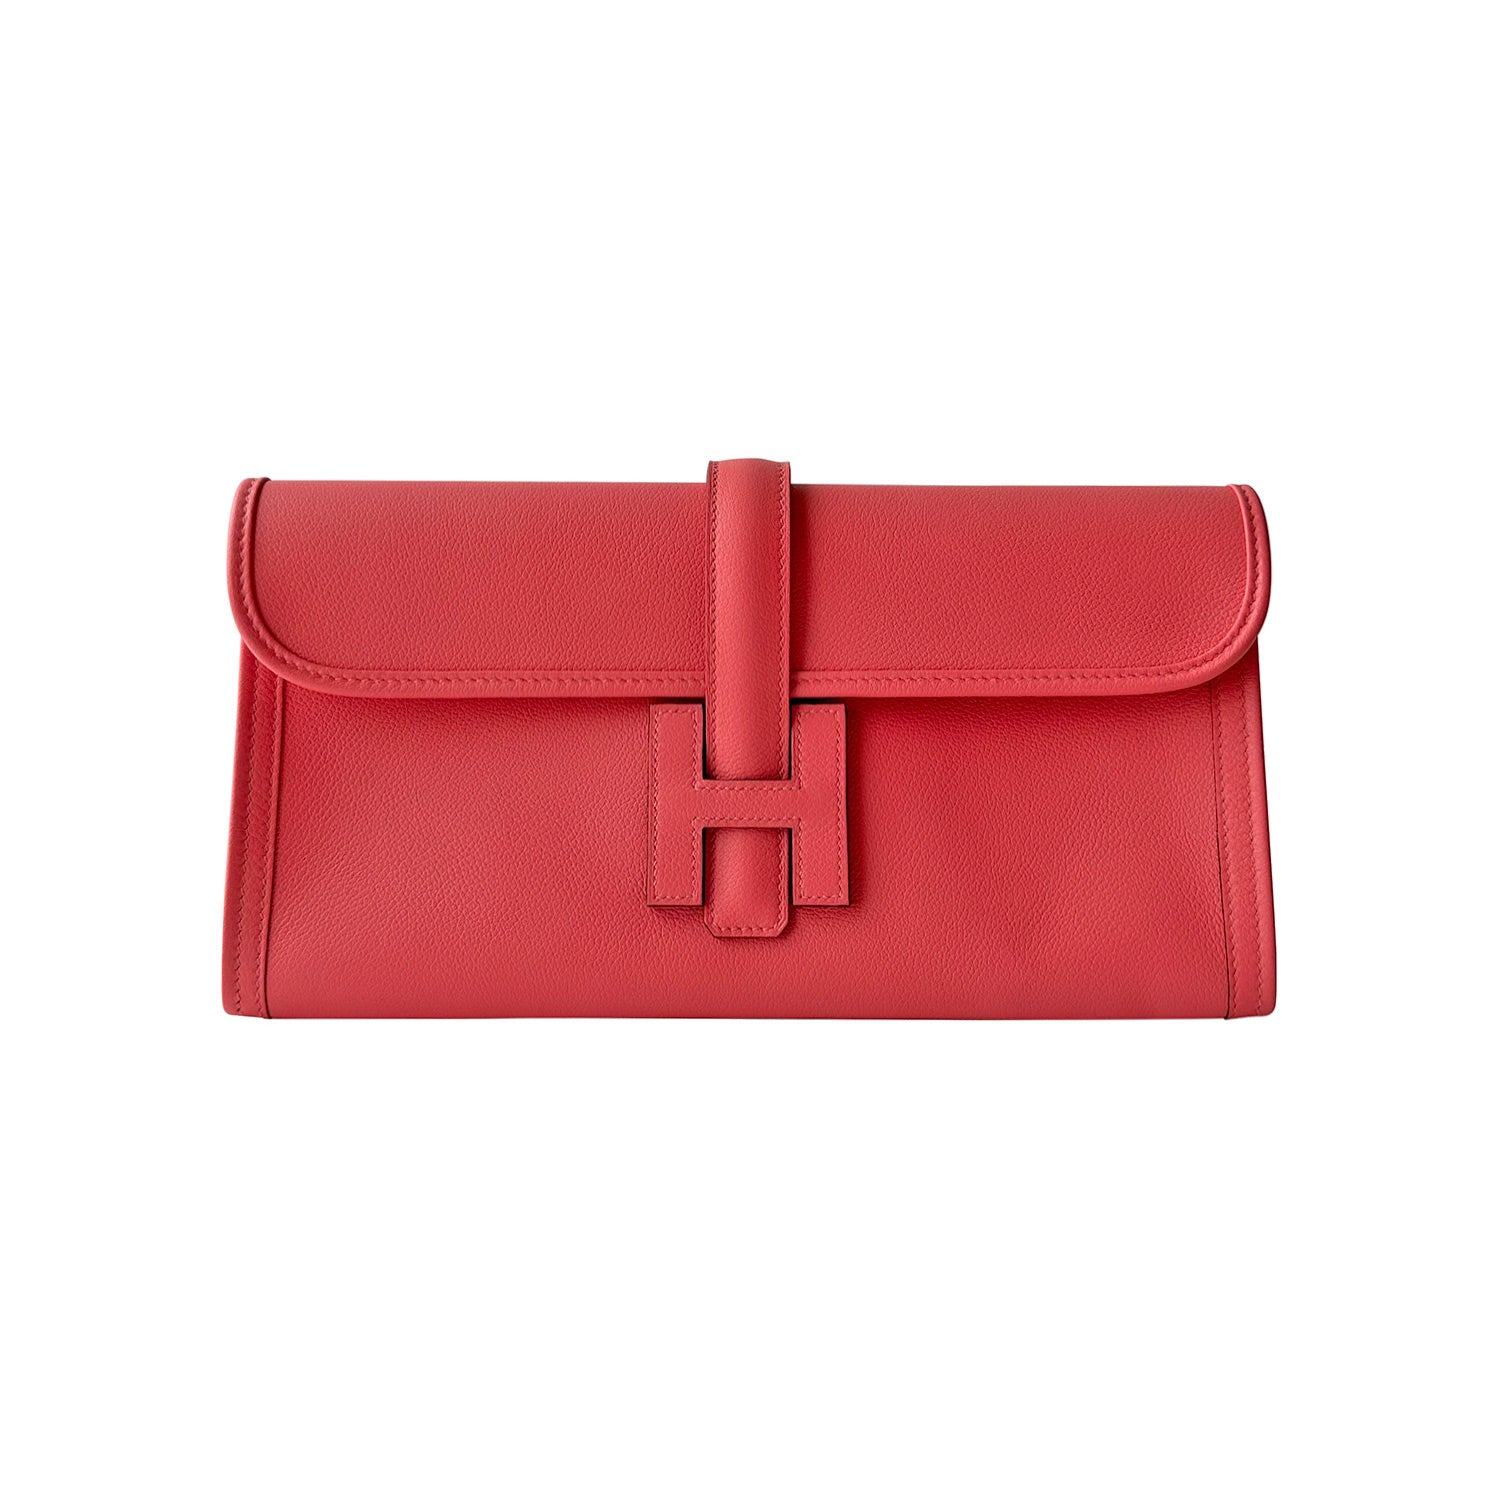 Shop authentic Hermes Dogon Recto Verso Wallet at revogue for just